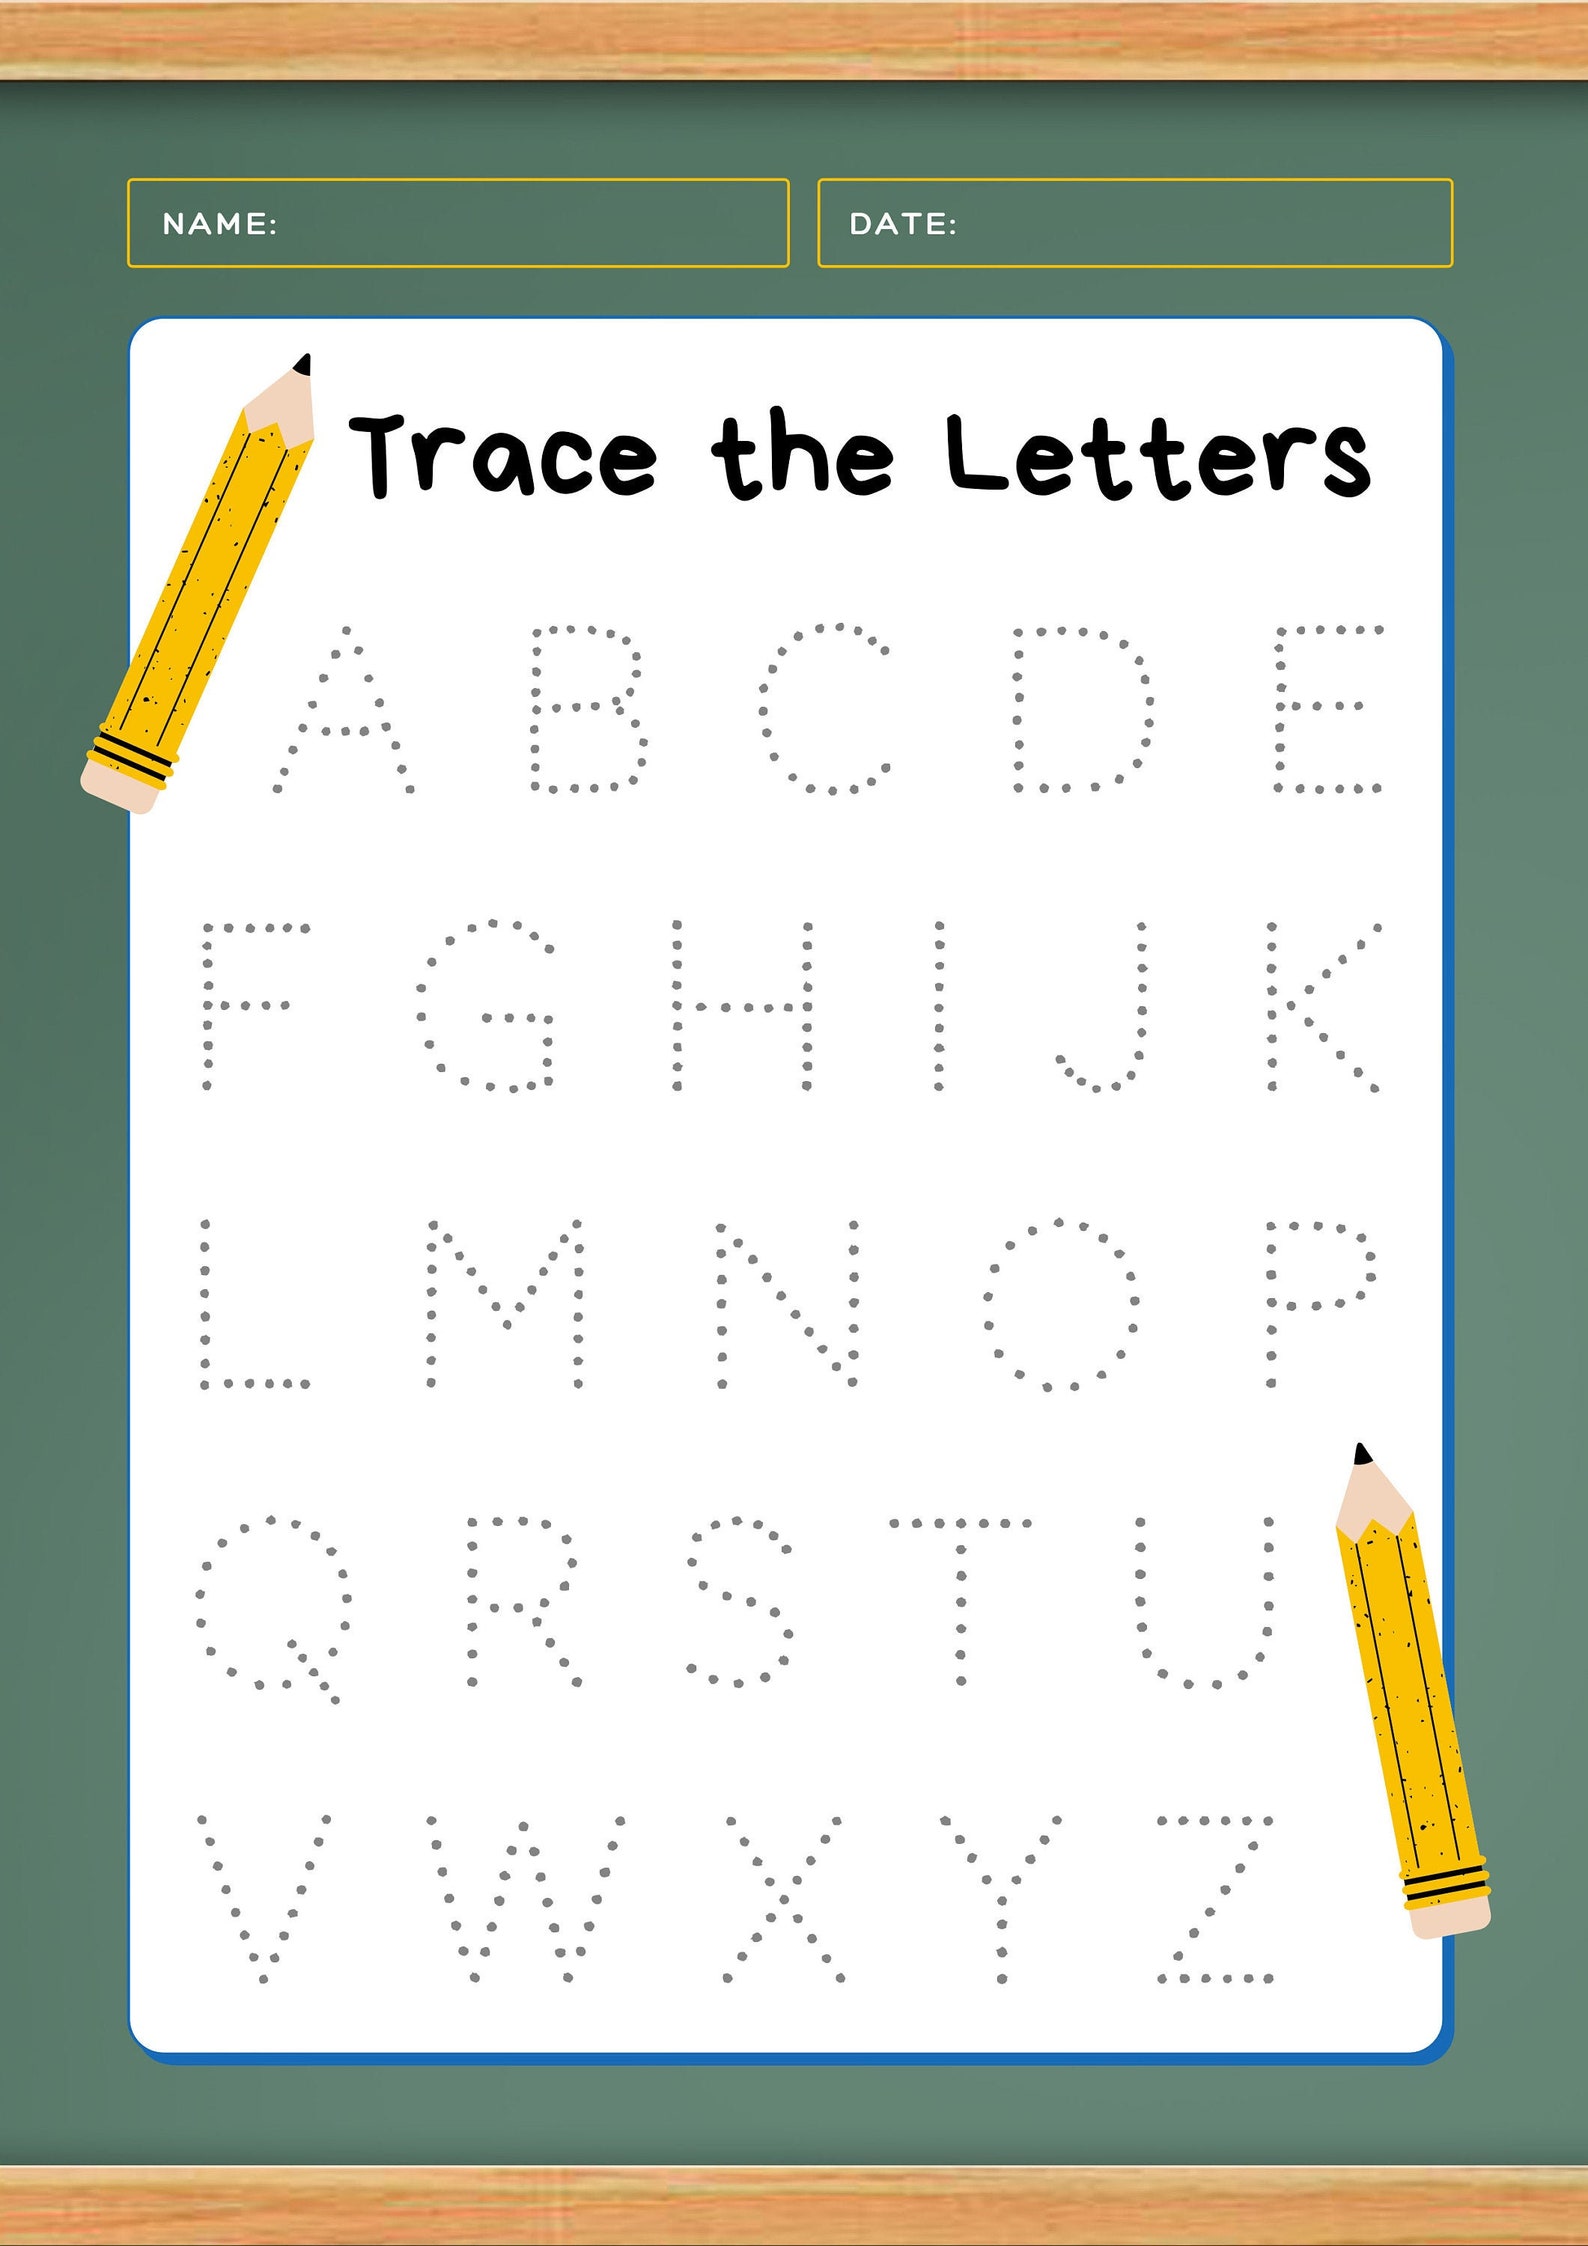 learn-to-write-abc-worksheets-alphabet-practice-write-imaets-etsy